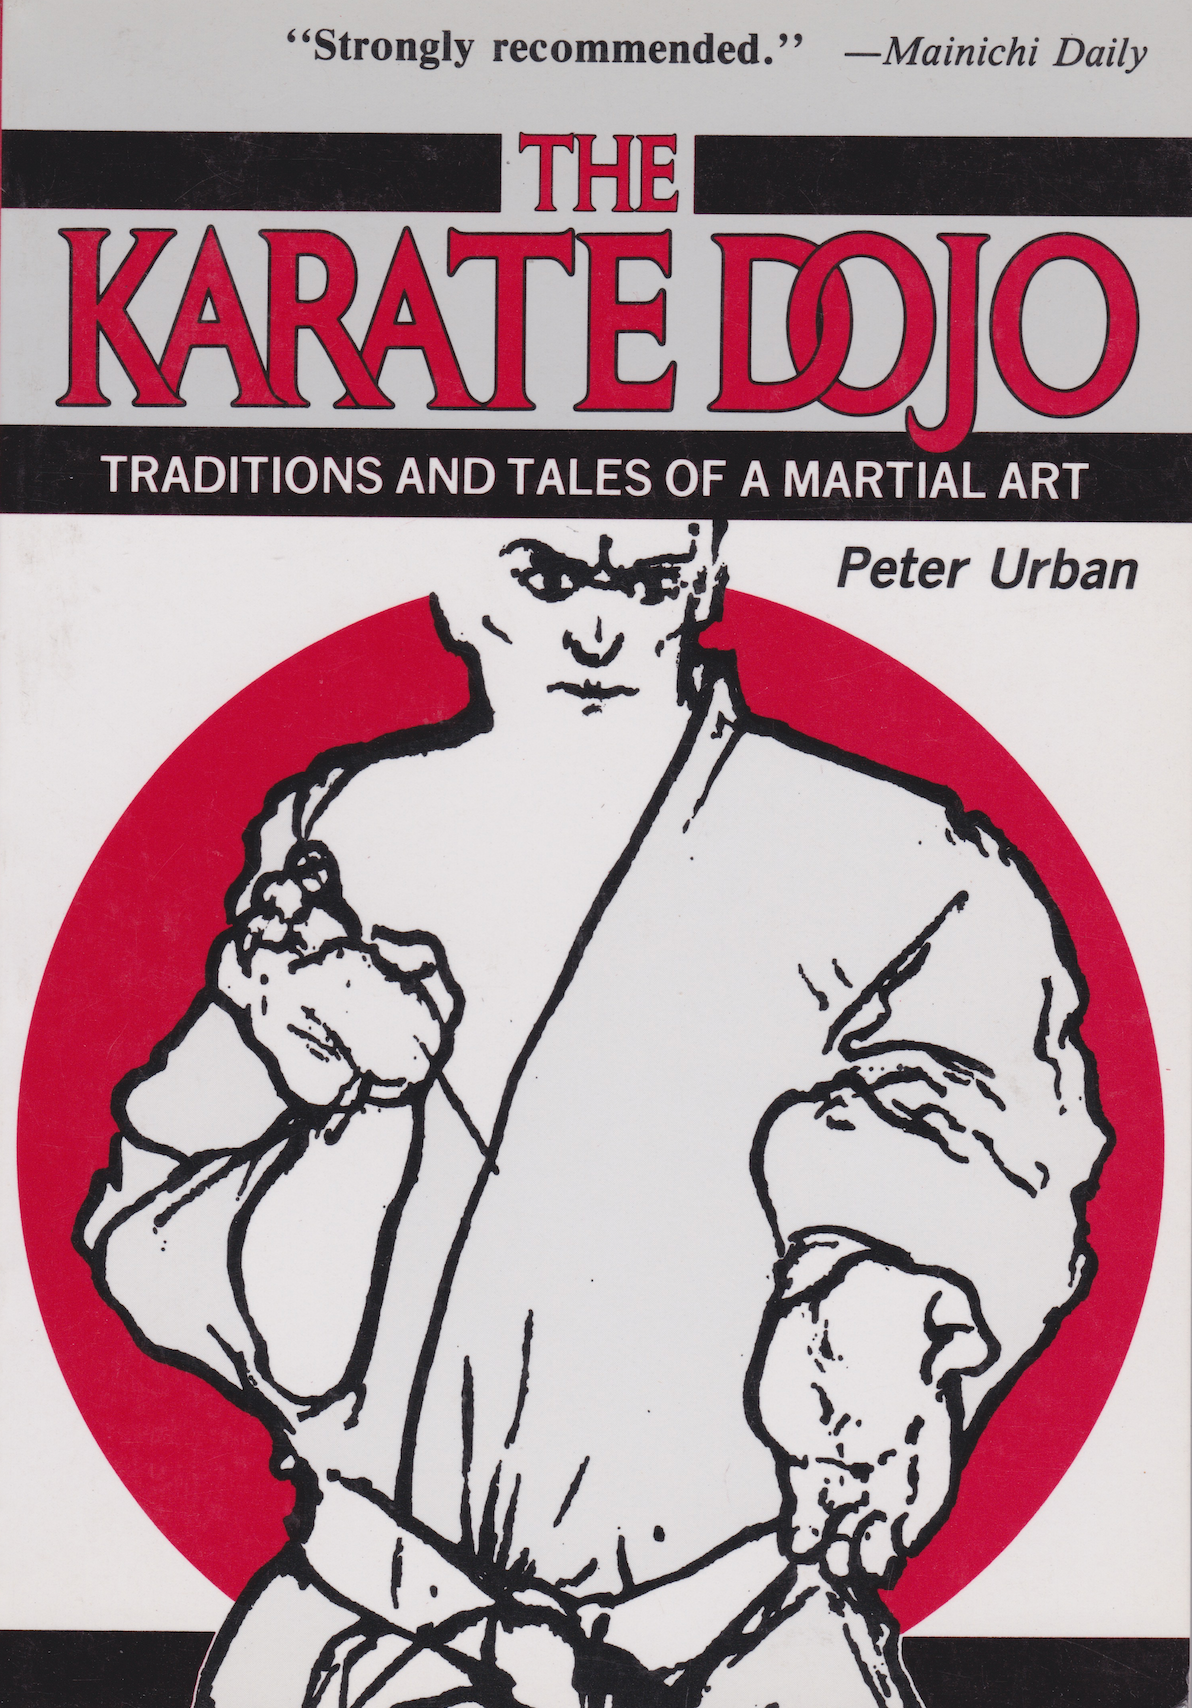 The Karate Dojo: Traditions and Tales of a Martial Art Book by Keith Urban (Preowned)